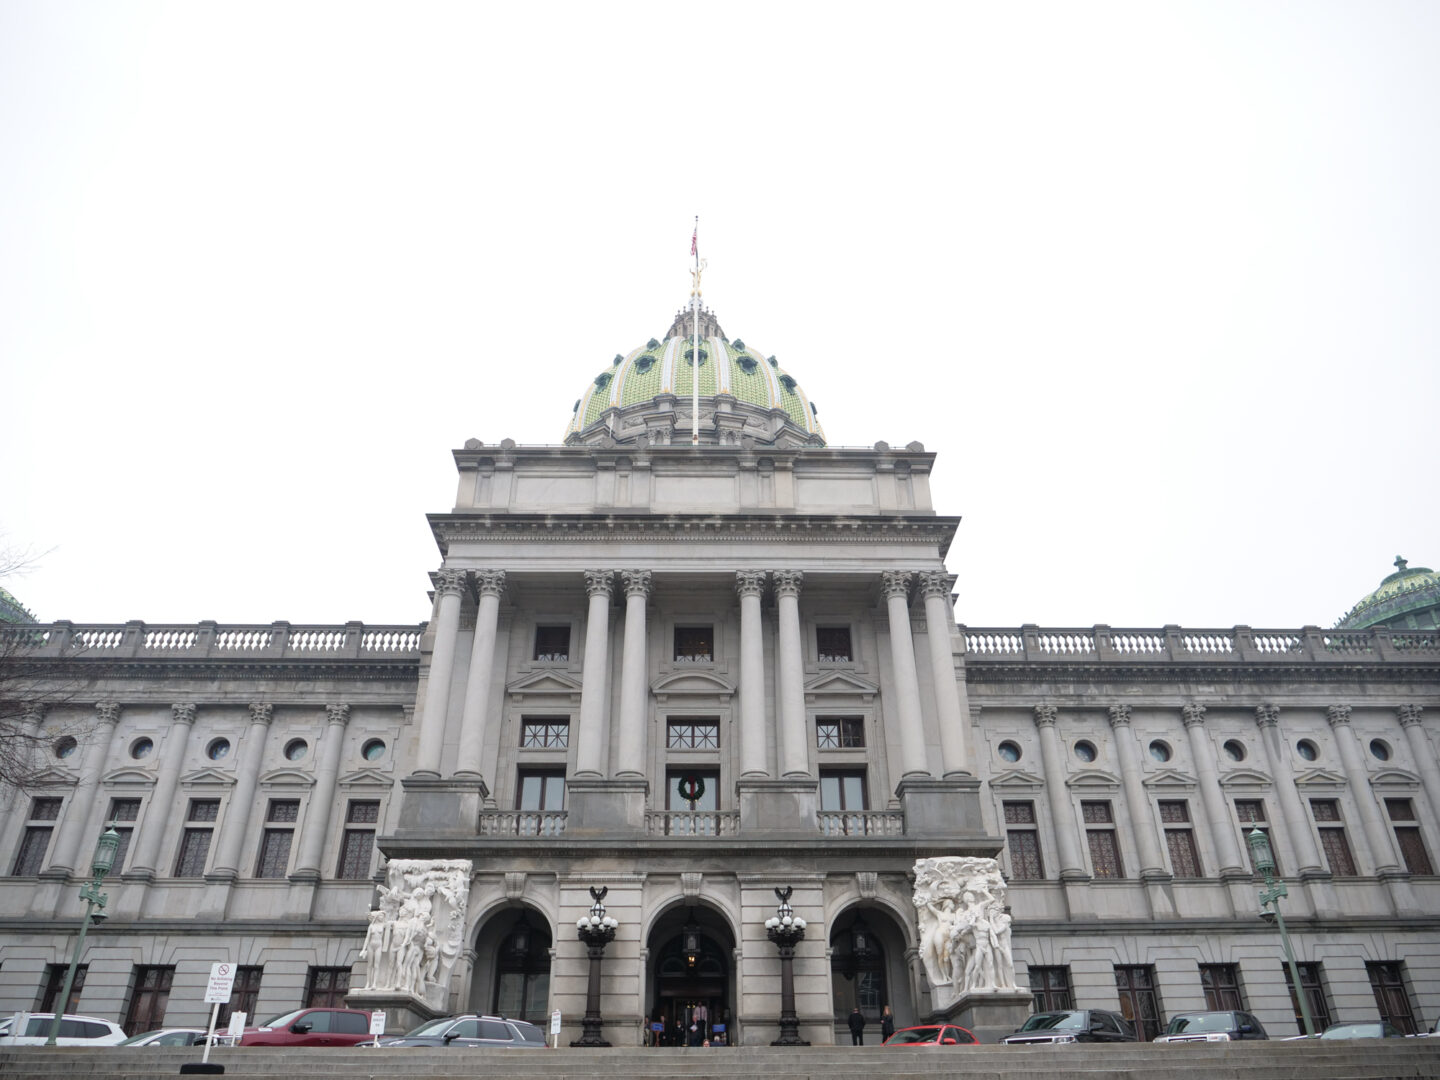 The Harrisburg state capitol building on Jan. 3, 2023.